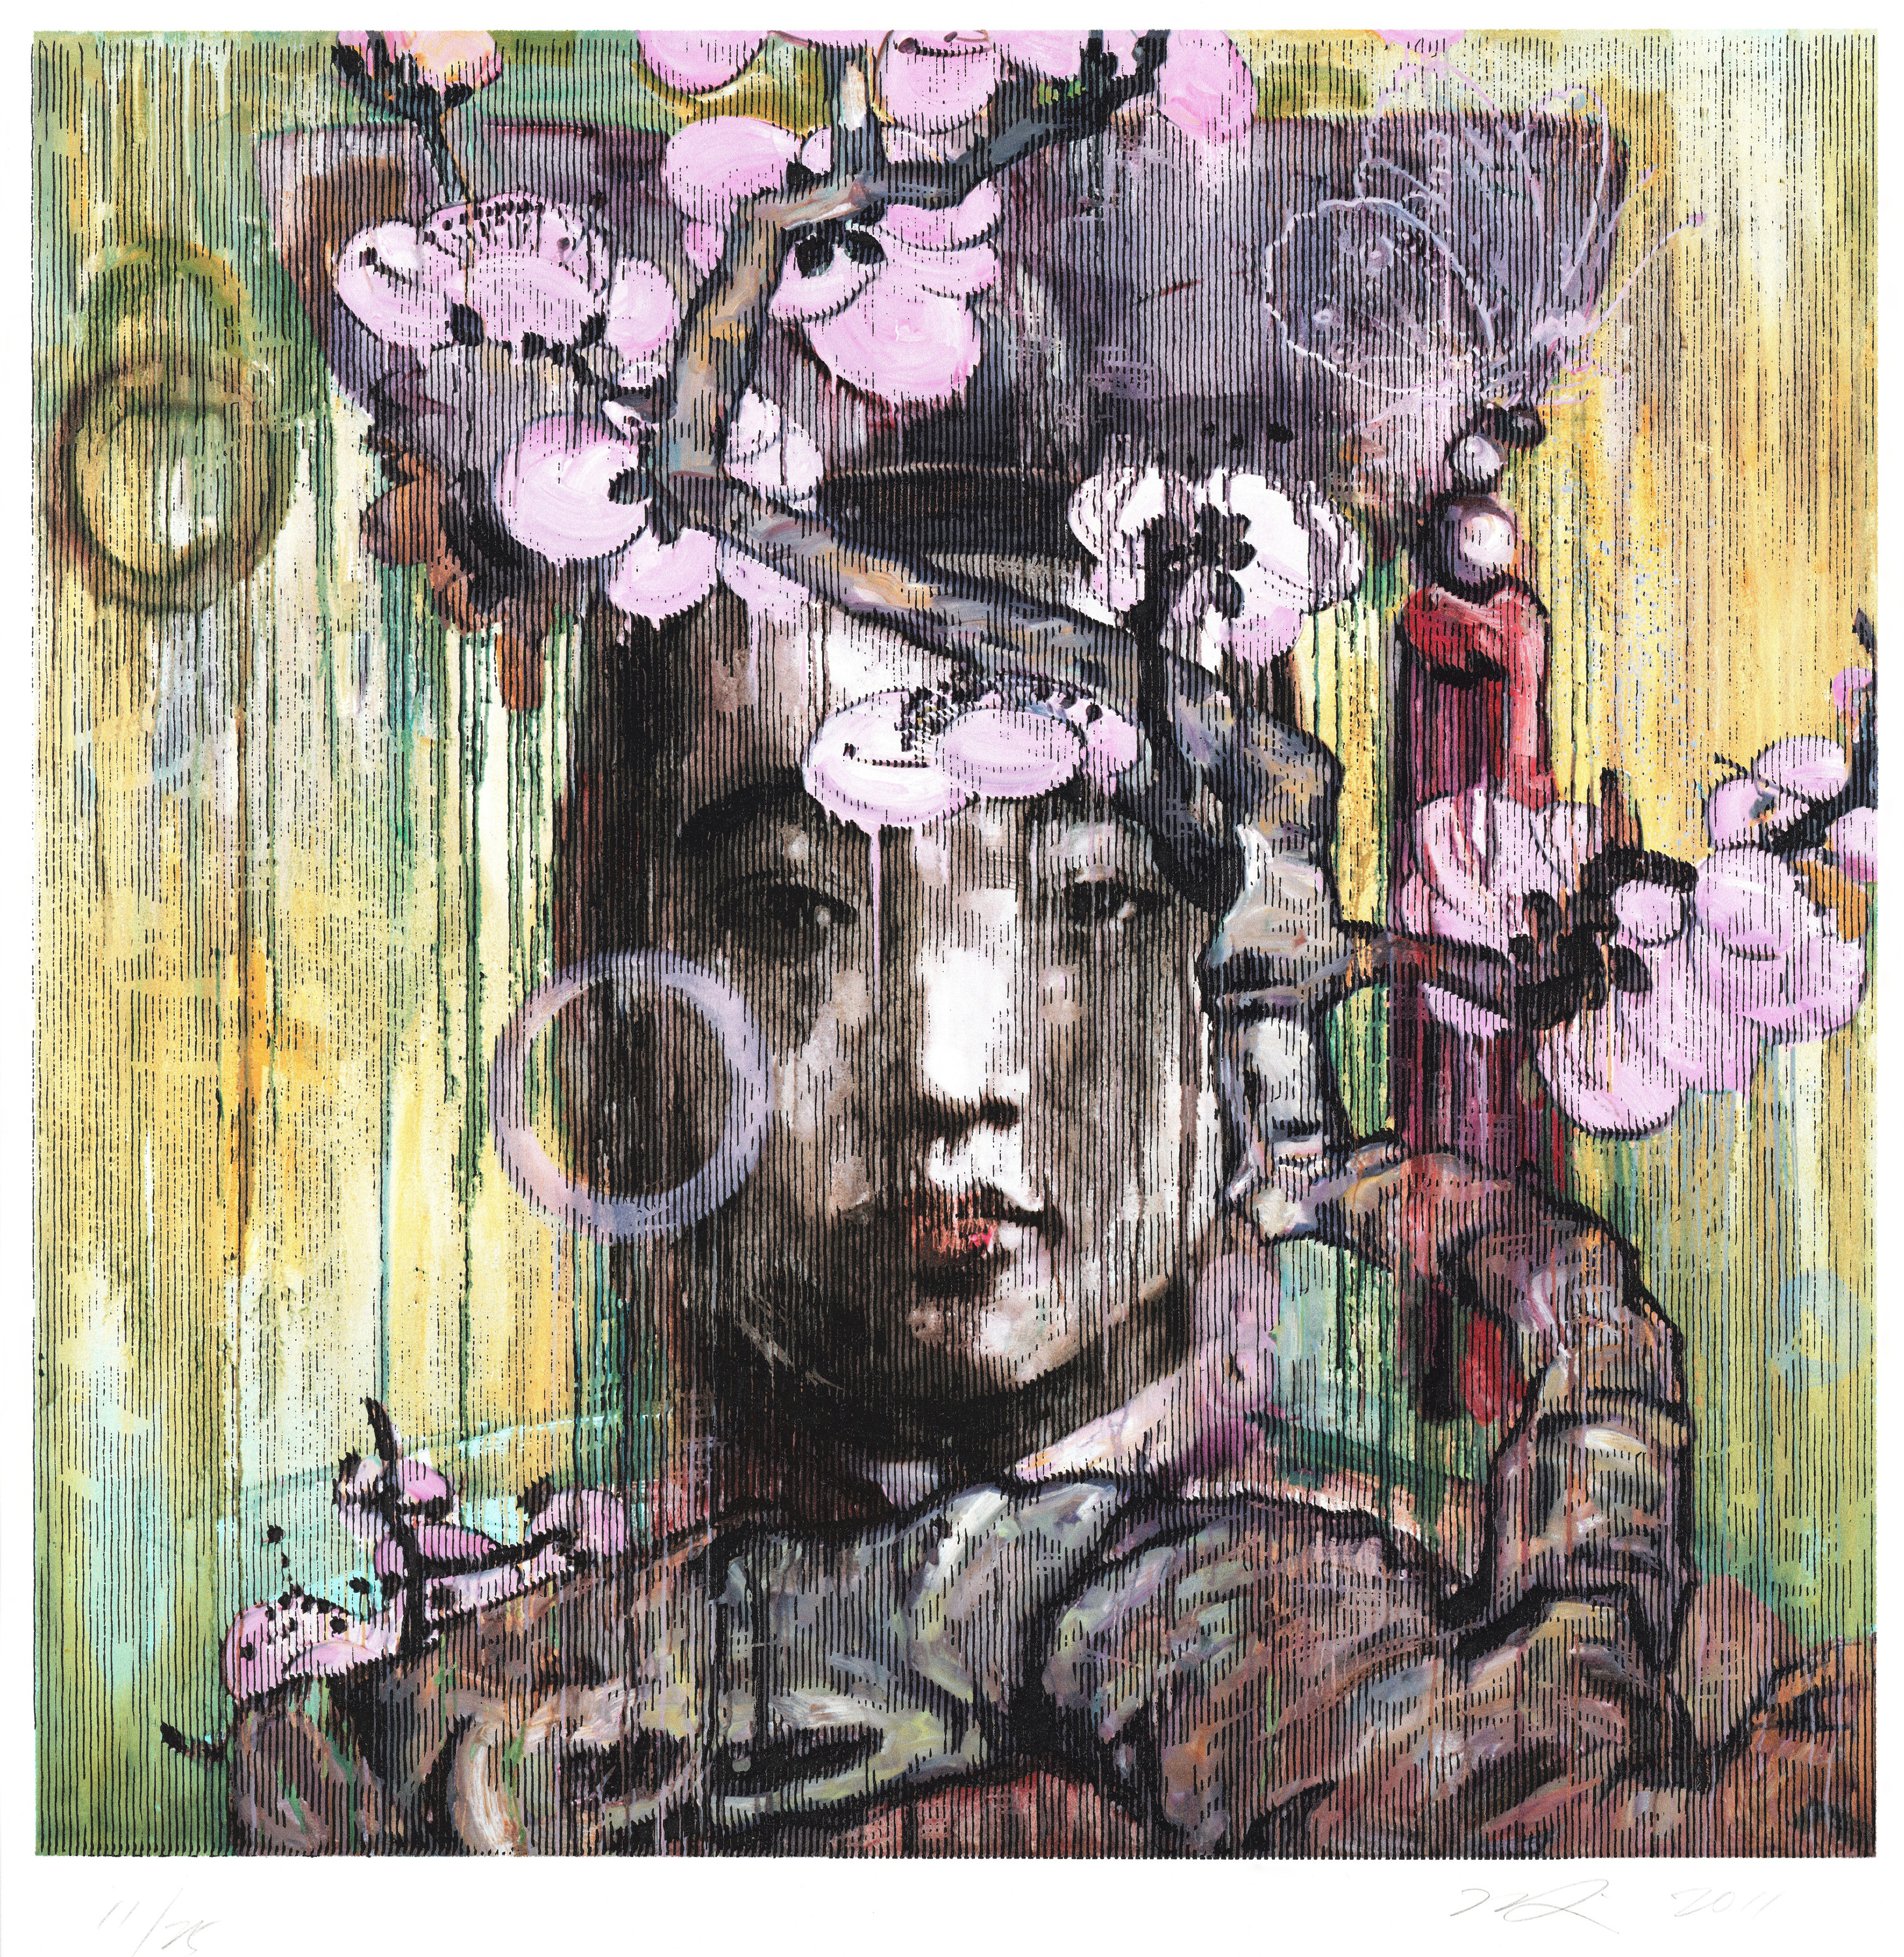 A square painting with layered, dripping textures of a light-skinned Chinese woman with dark hair and red lips seen from the shoulders up. She gazes straightforward at the viewer and wears a traditional Chinese headdress. She is partially obscured by a branch of pink blossoms.